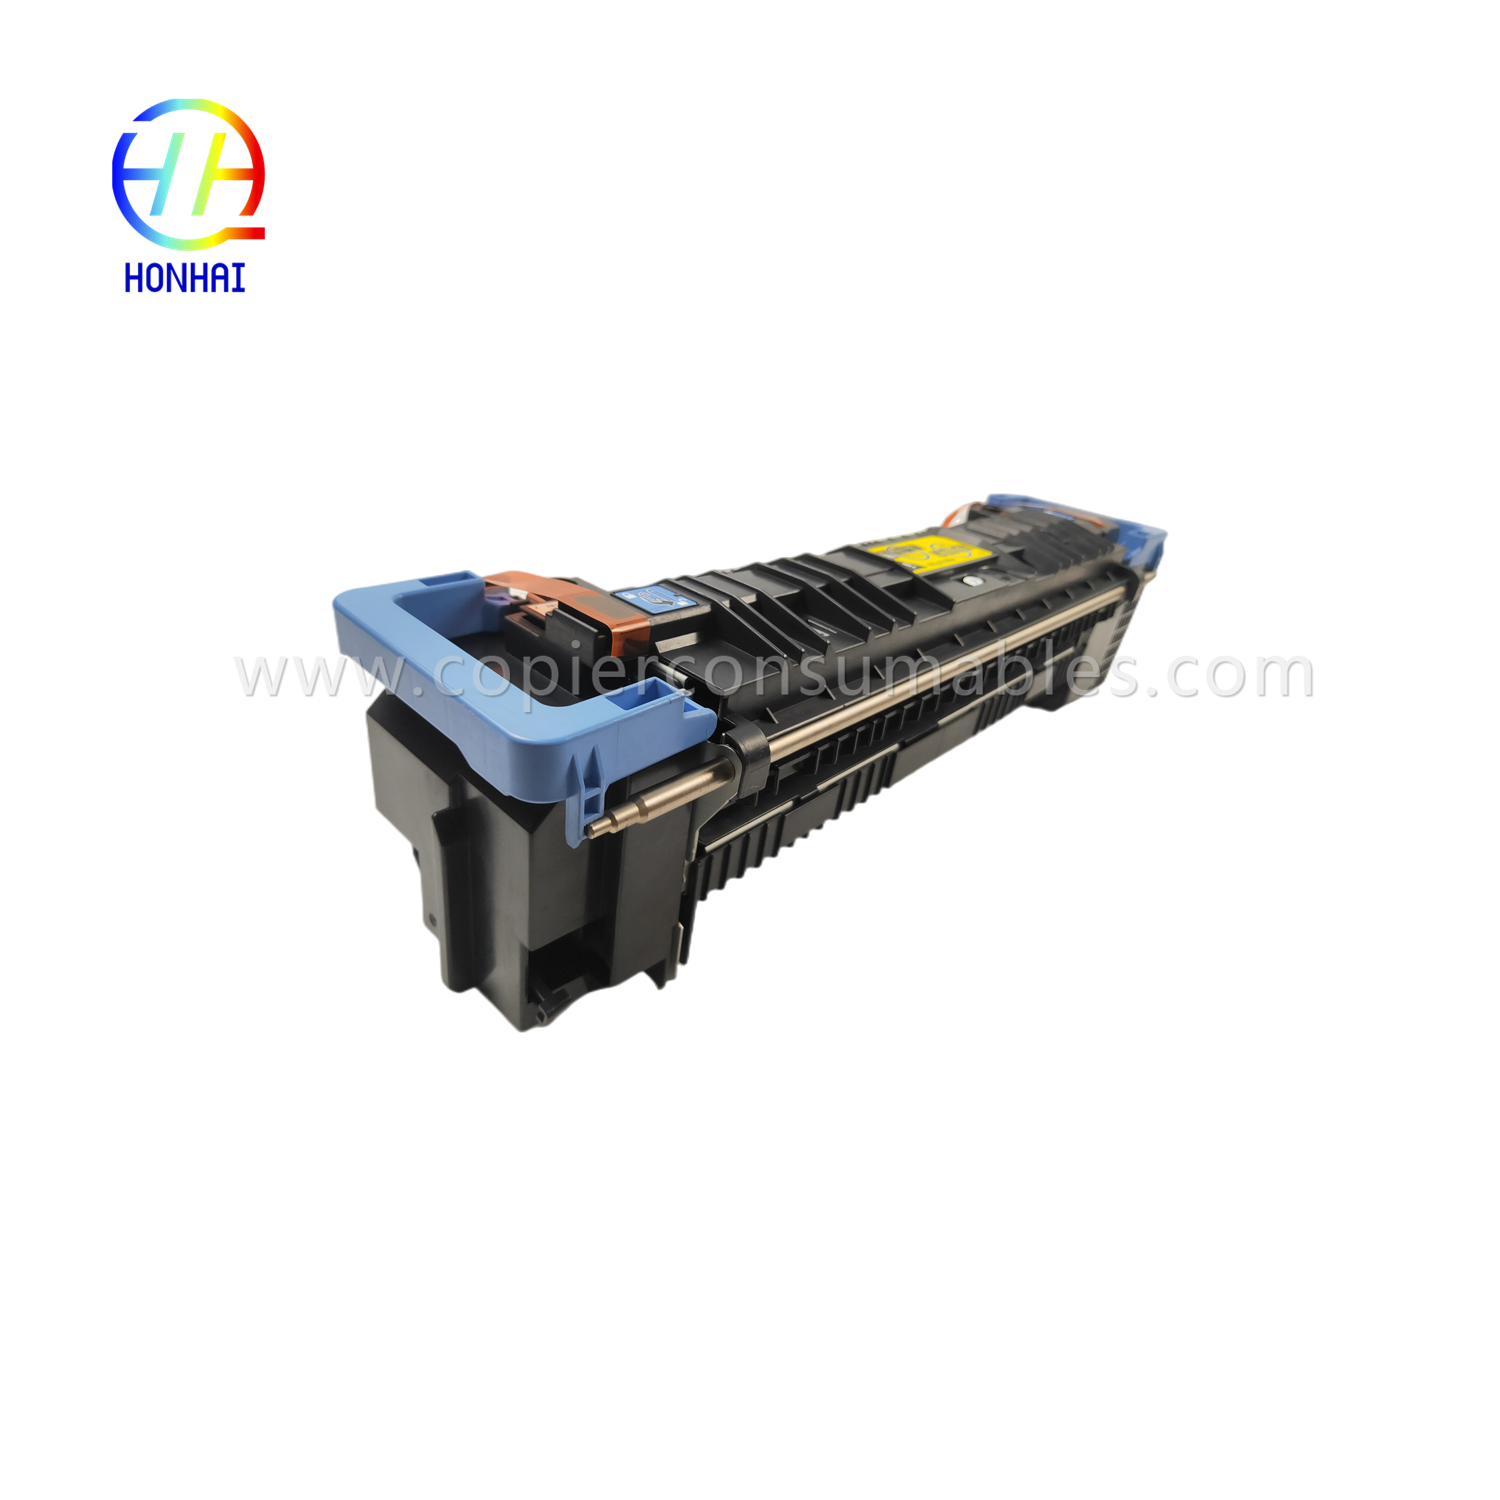 https://www.copierconsumables.com/fuser-assembly-unit-for-hp-m855-m880-m855dn-m855xh-m880z-m880z-c1n54-67901-c1n58-67901-fusing-heating-fixing/assy